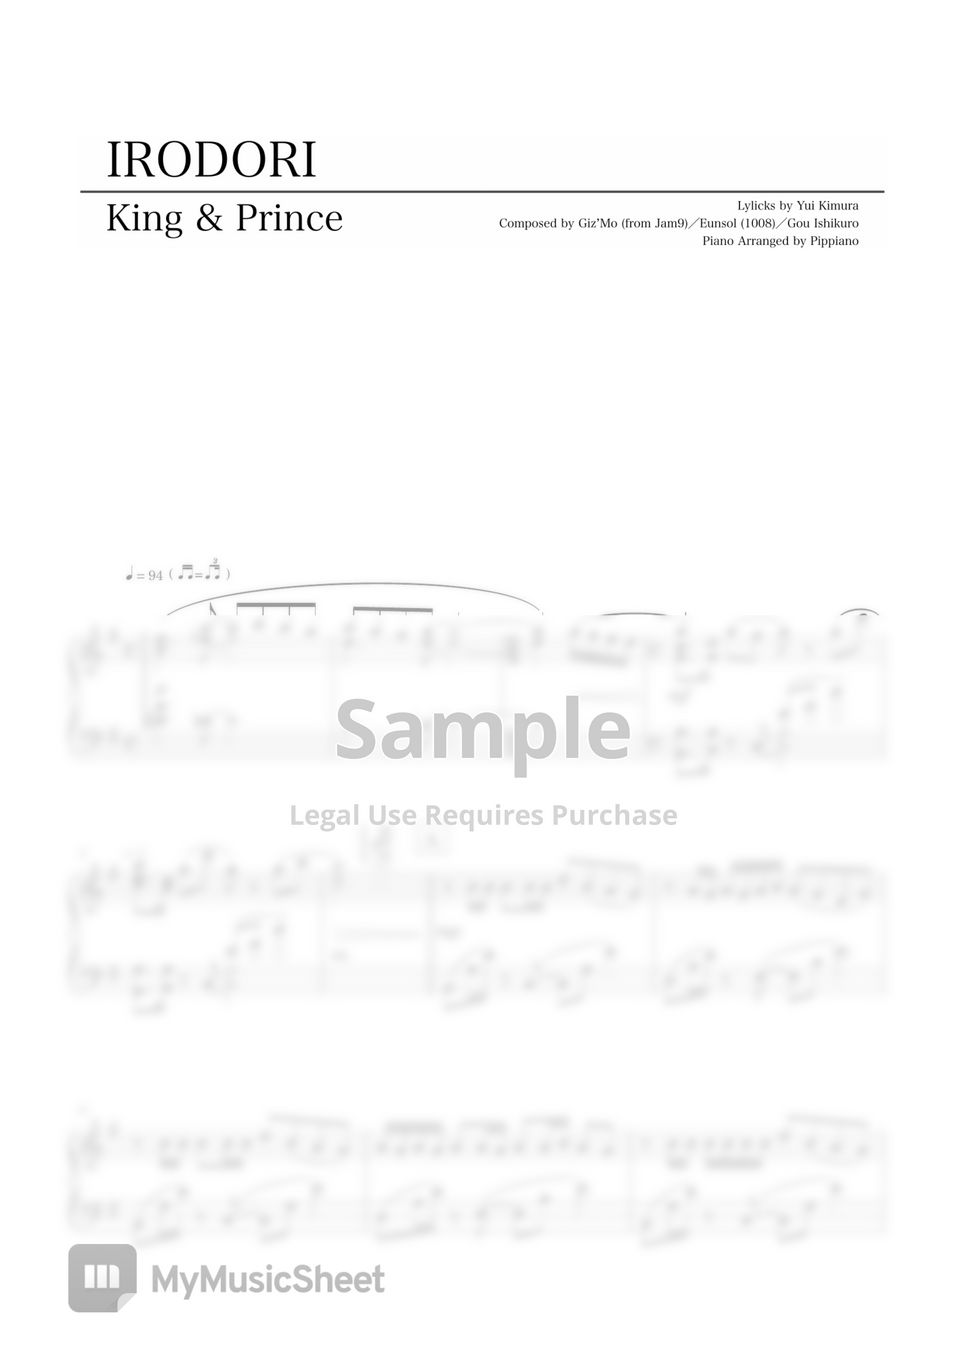 King & Prince - 彩り by Pippiano